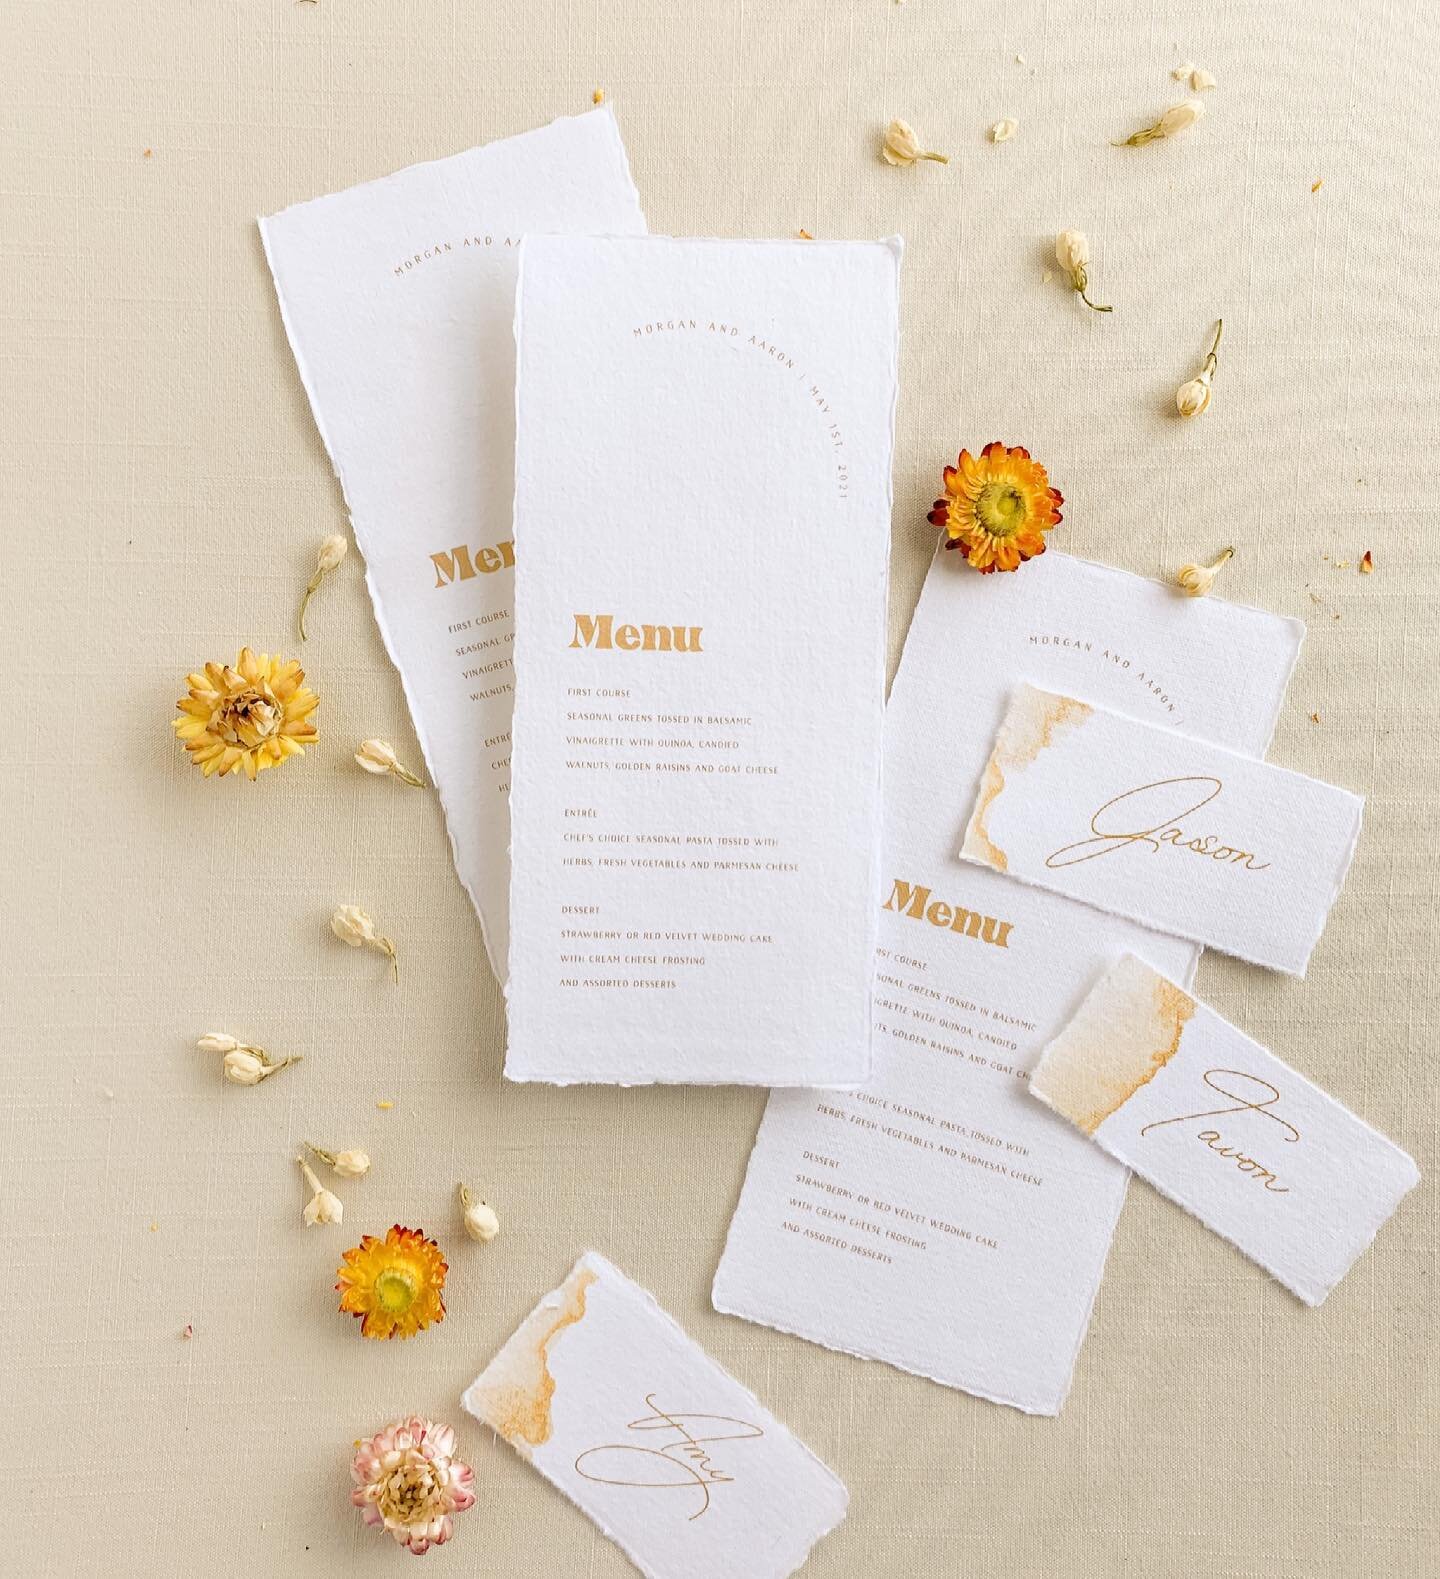 A short list of day-of paper goods you might want to include at your wedding:

- Signs (Oh, the signs! This includes welcome, parking, seating, social media, bar, buffet, dessert, etc.)
- Ceremony program
- Place Cards
- Escort Cards (seating chart)
- Menus
- Favor Cards

The list goes on. And yep - we can make it all 🙂

Currently offering day-of paper goods for custom invitation clients. Message me for more info! 
.
.
.
#uniqueweddingideas #weddingvenue #weddingmenu #dayofpapergoods #weddingmenudesign #watercolorinvitations #fineartwedding #engagedandinspired #weddingpapergoods #smallweddingideas #intimateceremony #weddinginvitations #weddingstationery #stationerydesign #customweddinginvitation #watercolorinvitation #customweddinginvitations #weddinginvitation #bespokeweddinginvitations #stationerylover #covidwedding #watercolorinvitations #floridawedding #californiawedding #newyorkwedding #fineartweddings #handmadepaper #fineartinvitations #bridetobe2021 #fineartbride